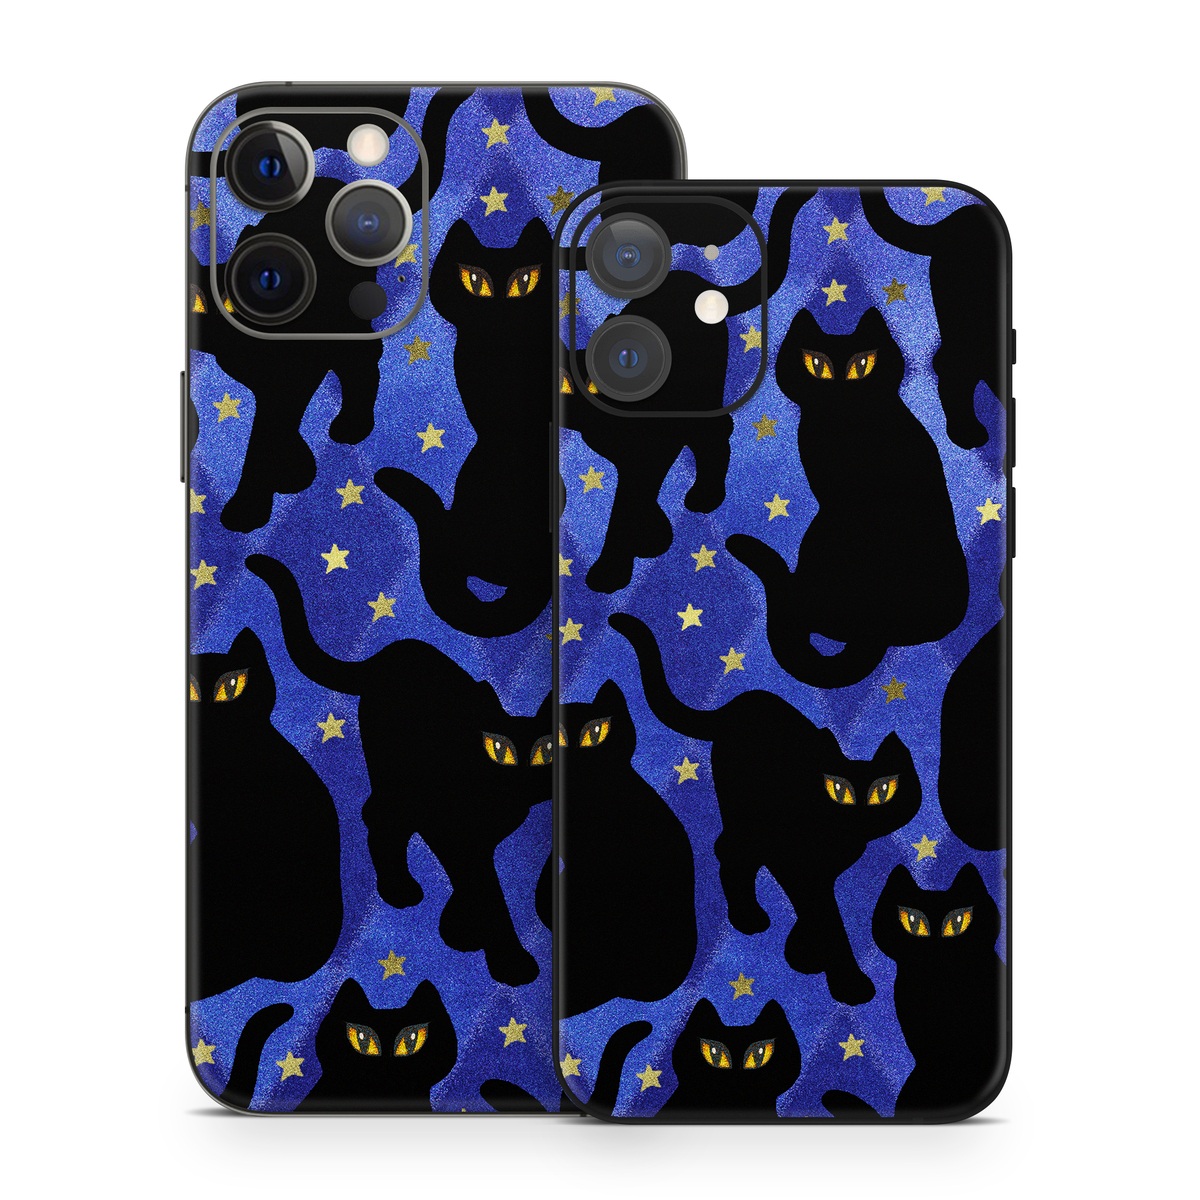 iPhone 12 Series Skin design of Black cat, Black, Cat, Small to medium-sized cats, Pattern, Felidae, Design, Electric blue, Illustration, Art, with black, blue, purple, yellow colors